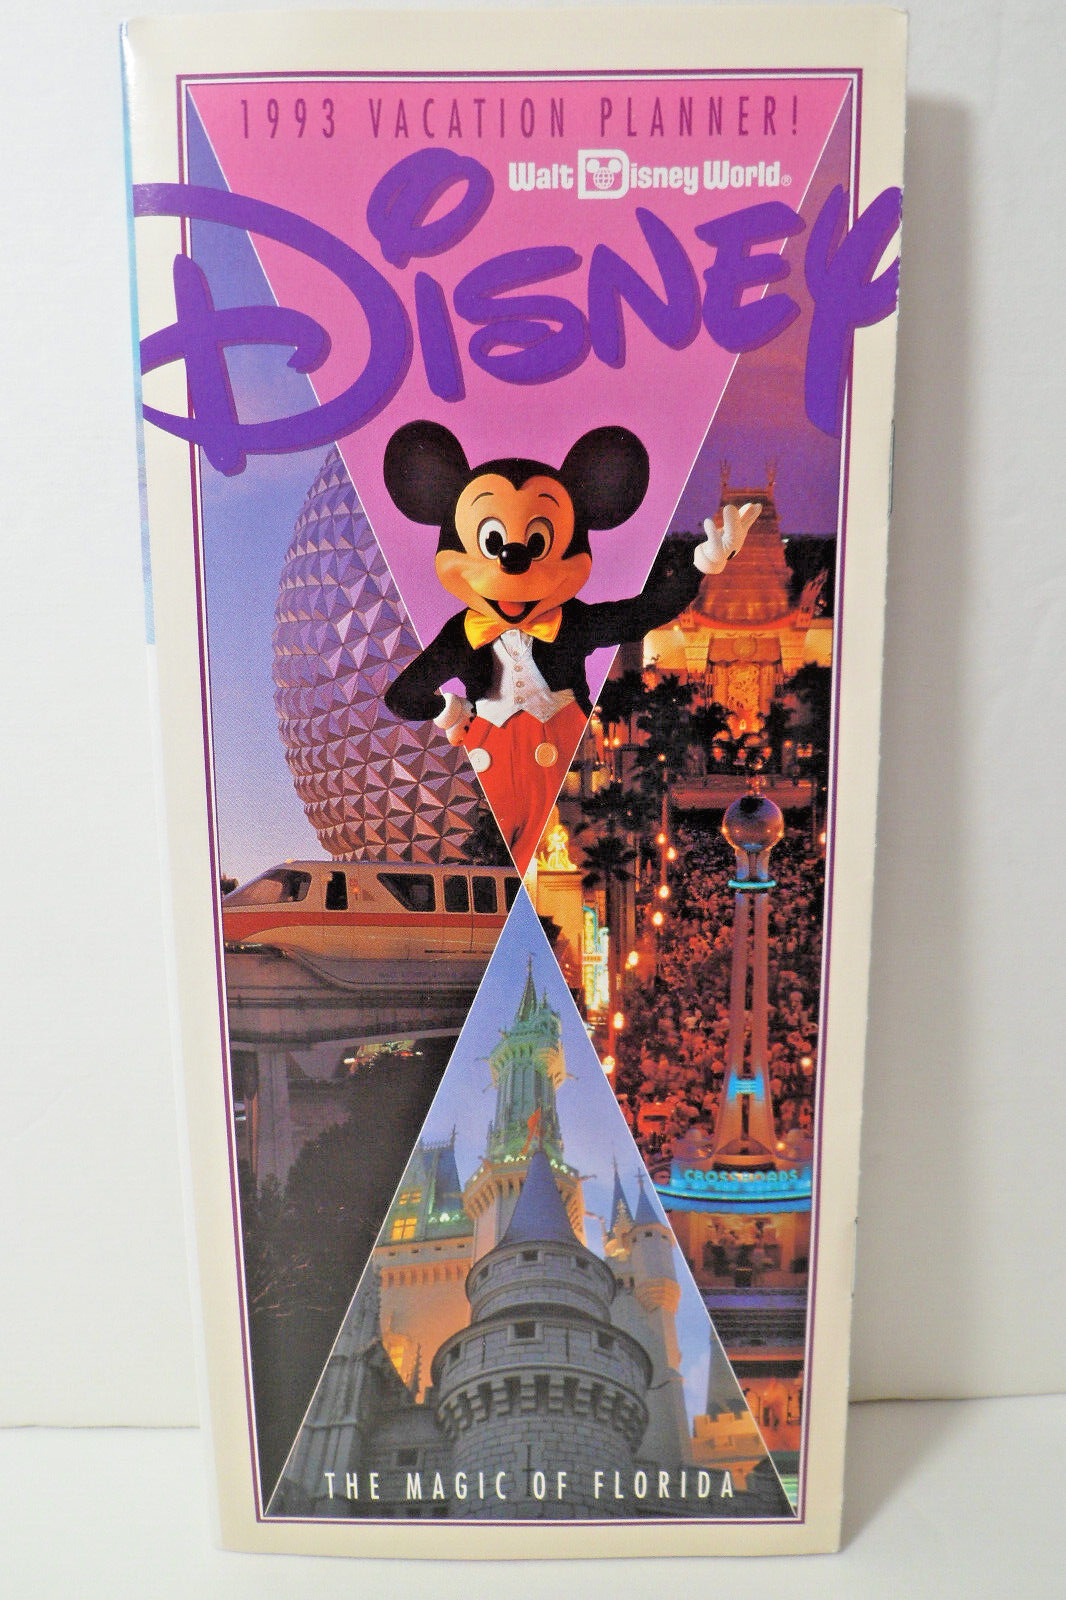 1993 Walt Disney World Vacation Planner - The Magic of Florida - 16 Page Foldout